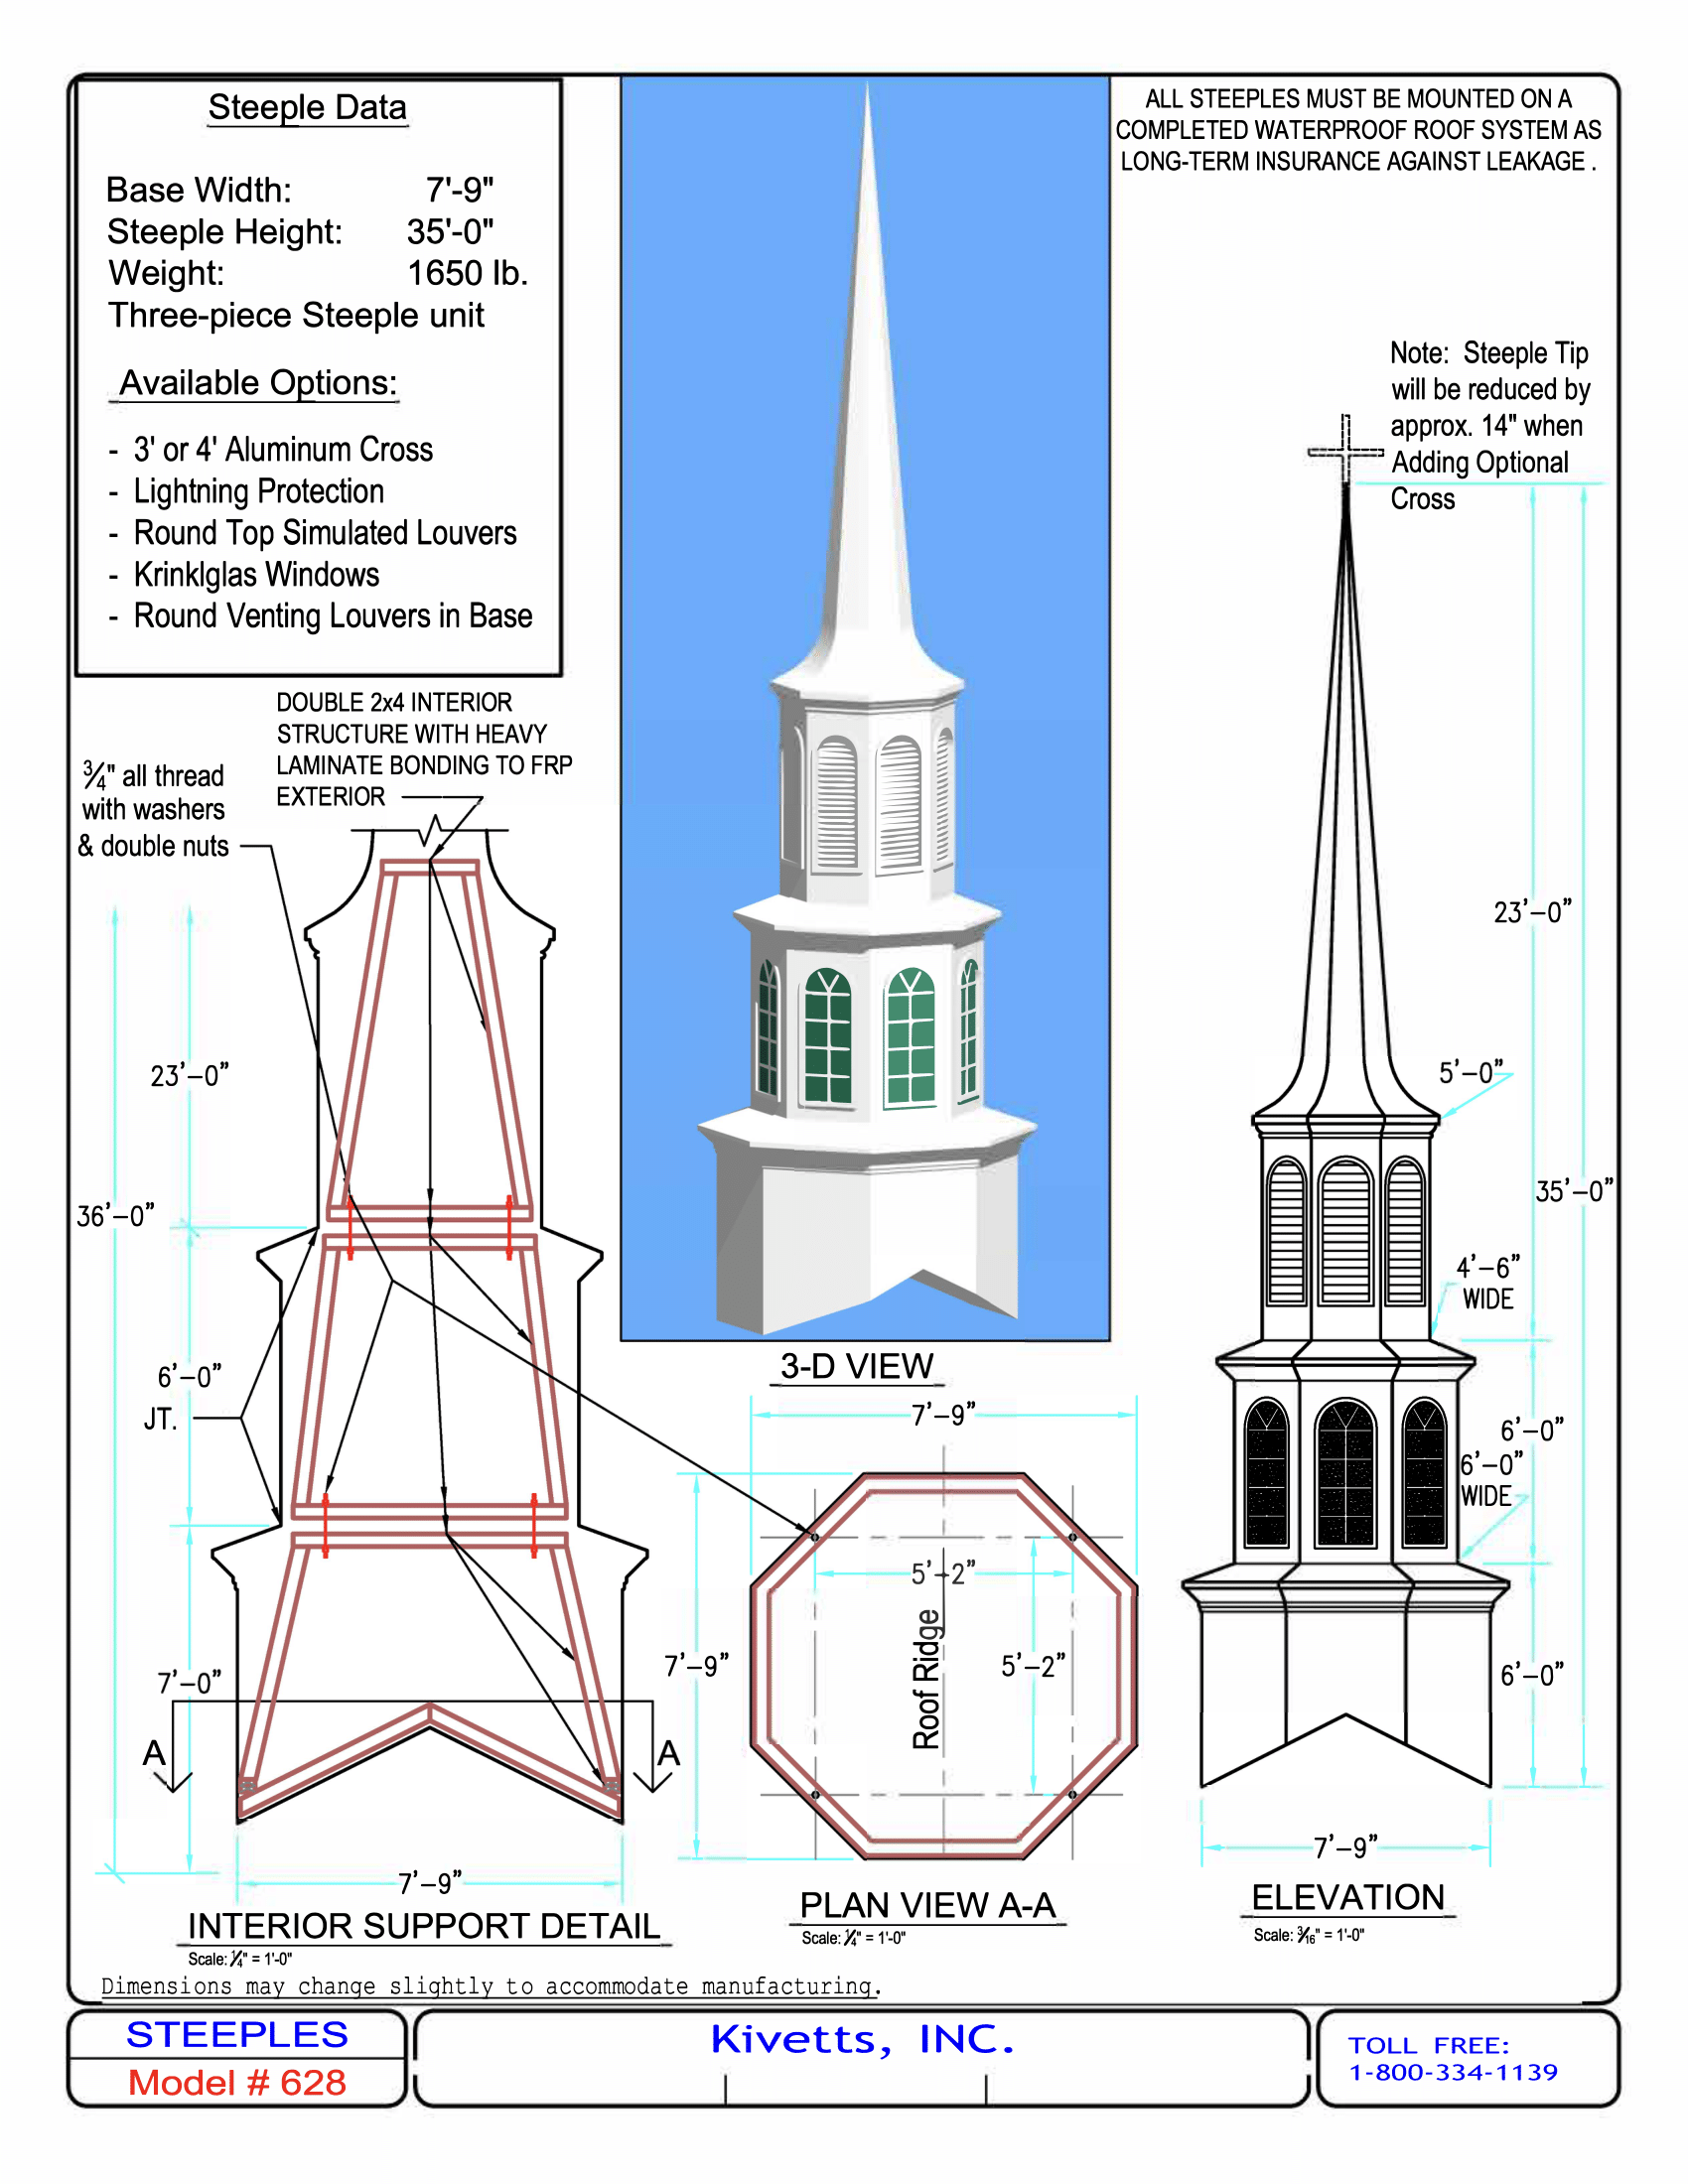 Christ Church steeple is leaning, and help is on the way to set things  straight